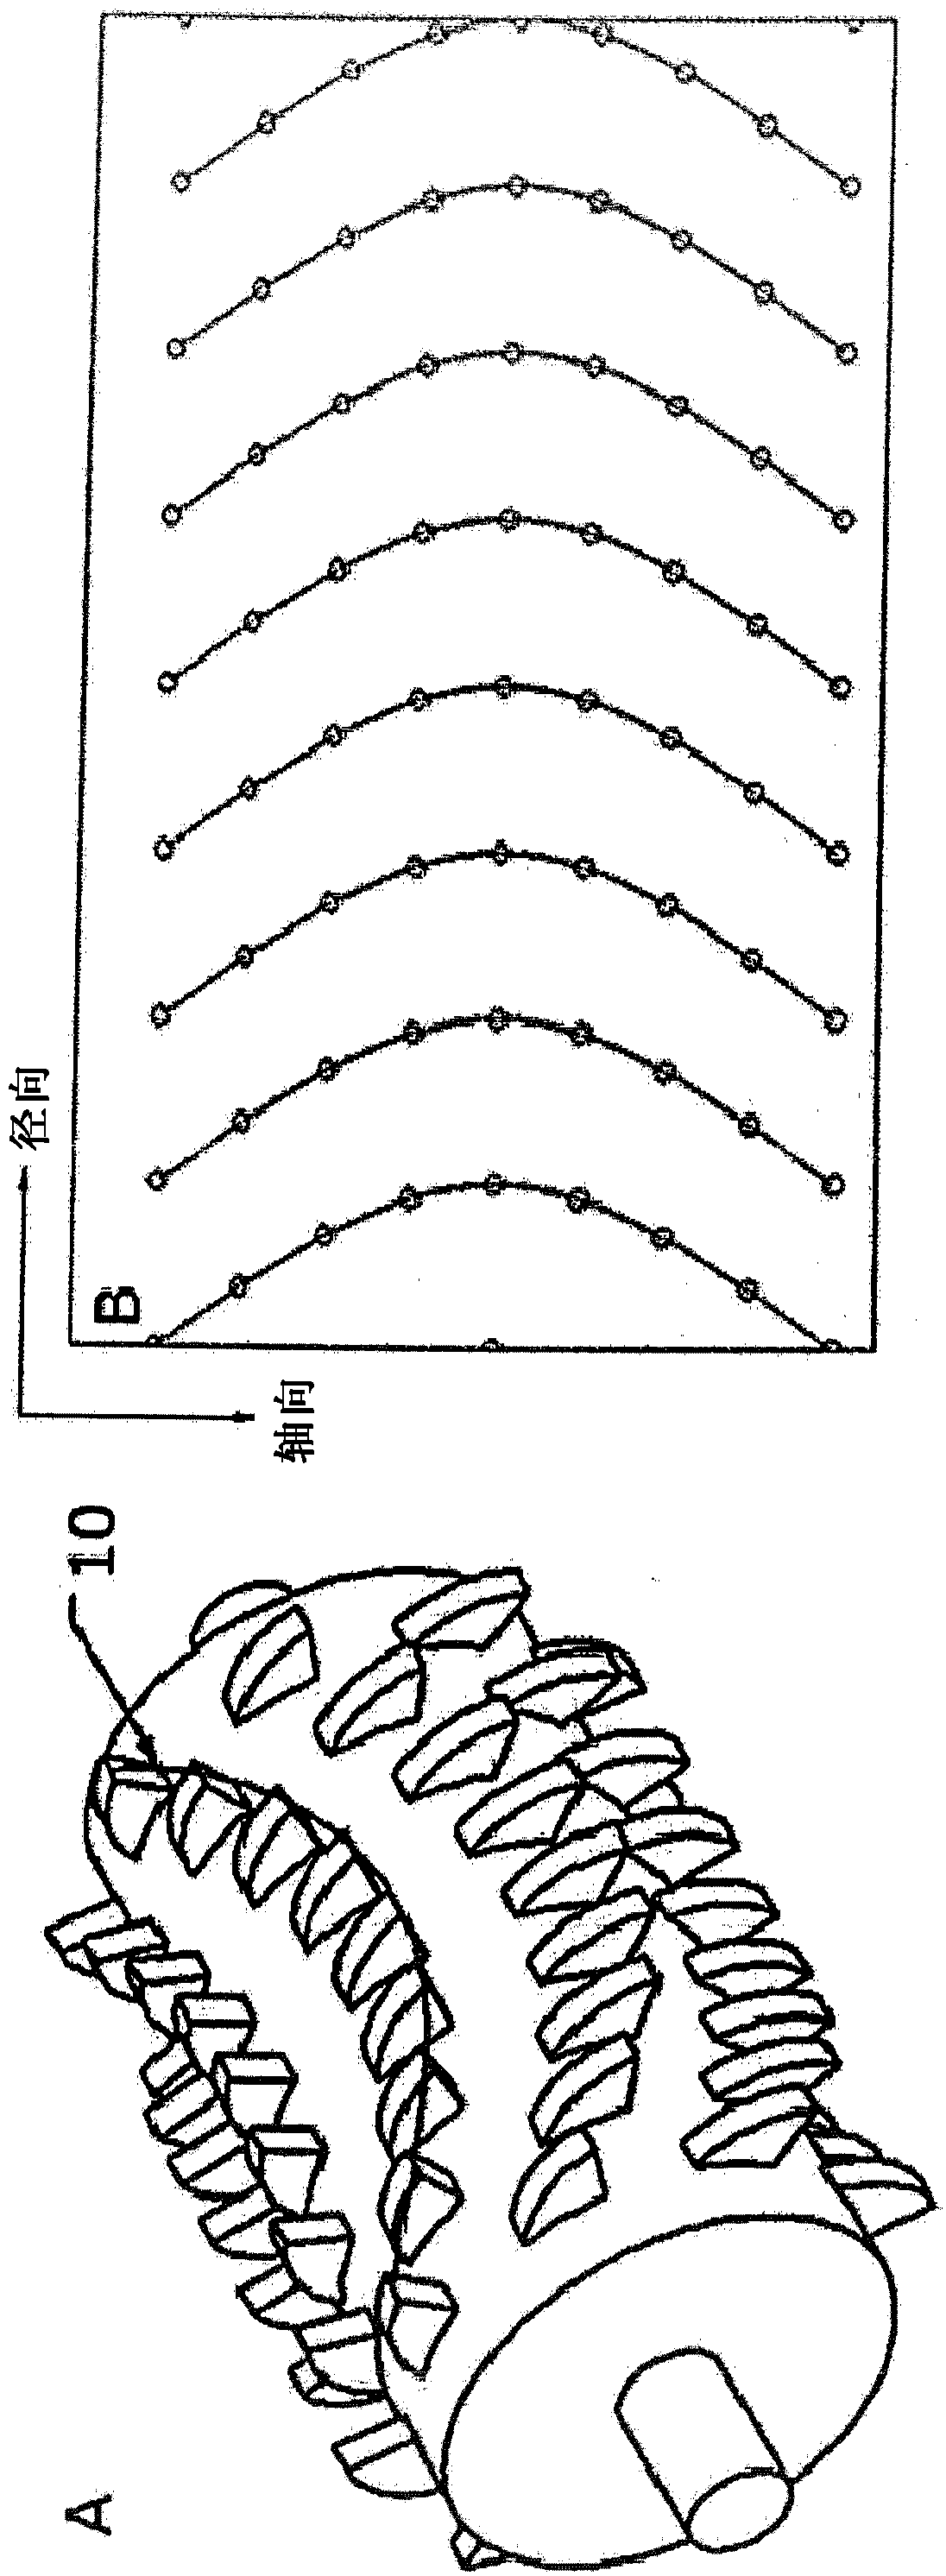 Arc-shaped and polygonal crushing tooth arrangement in rotor crushers and roller crushers